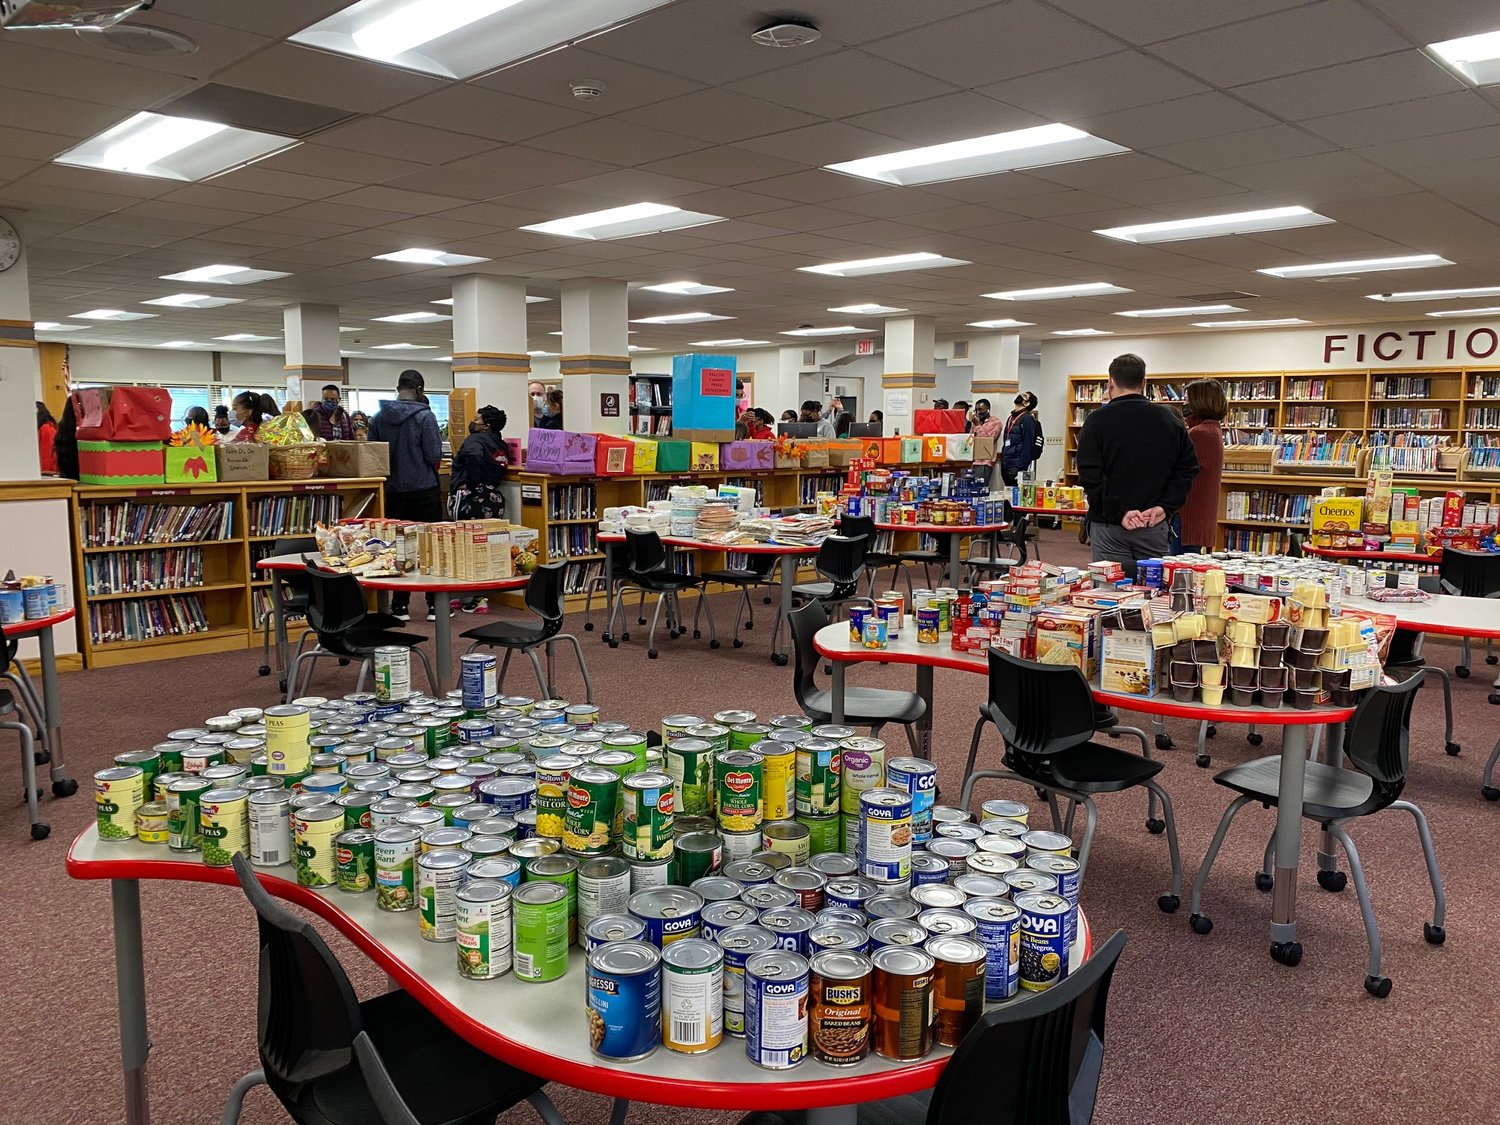 The South High School library was filled with donated food items from the community.